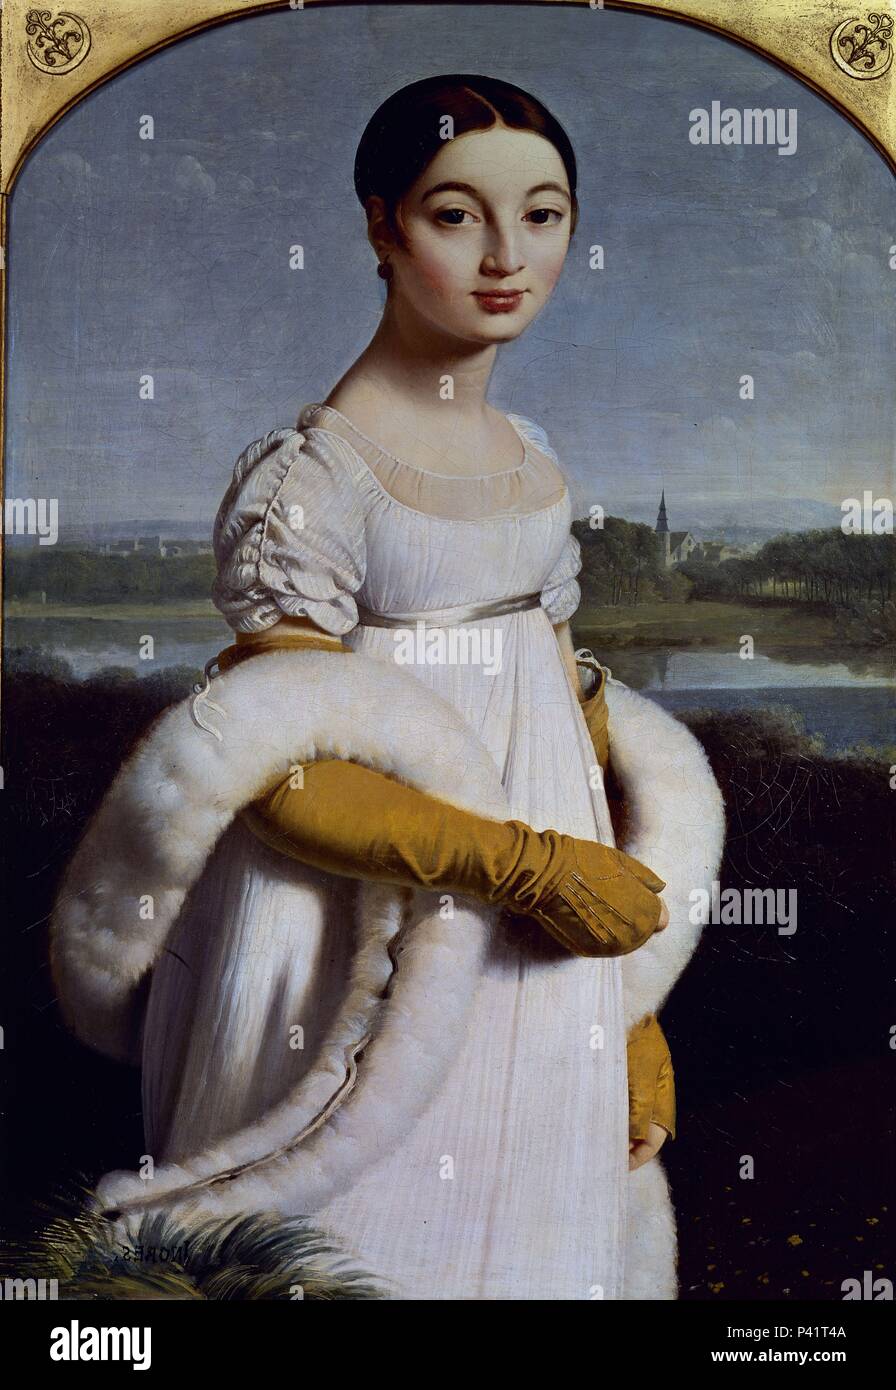 MADEMOISELLE RIVIERE - 1805 - O/L - 100x70 - NEOCLASICISMO FRANCES. Author: Jean Auguste Dominique Ingres (1780-1867). Location: LOUVRE MUSEUM-PAINTINGS, FRANCE. Stock Photo